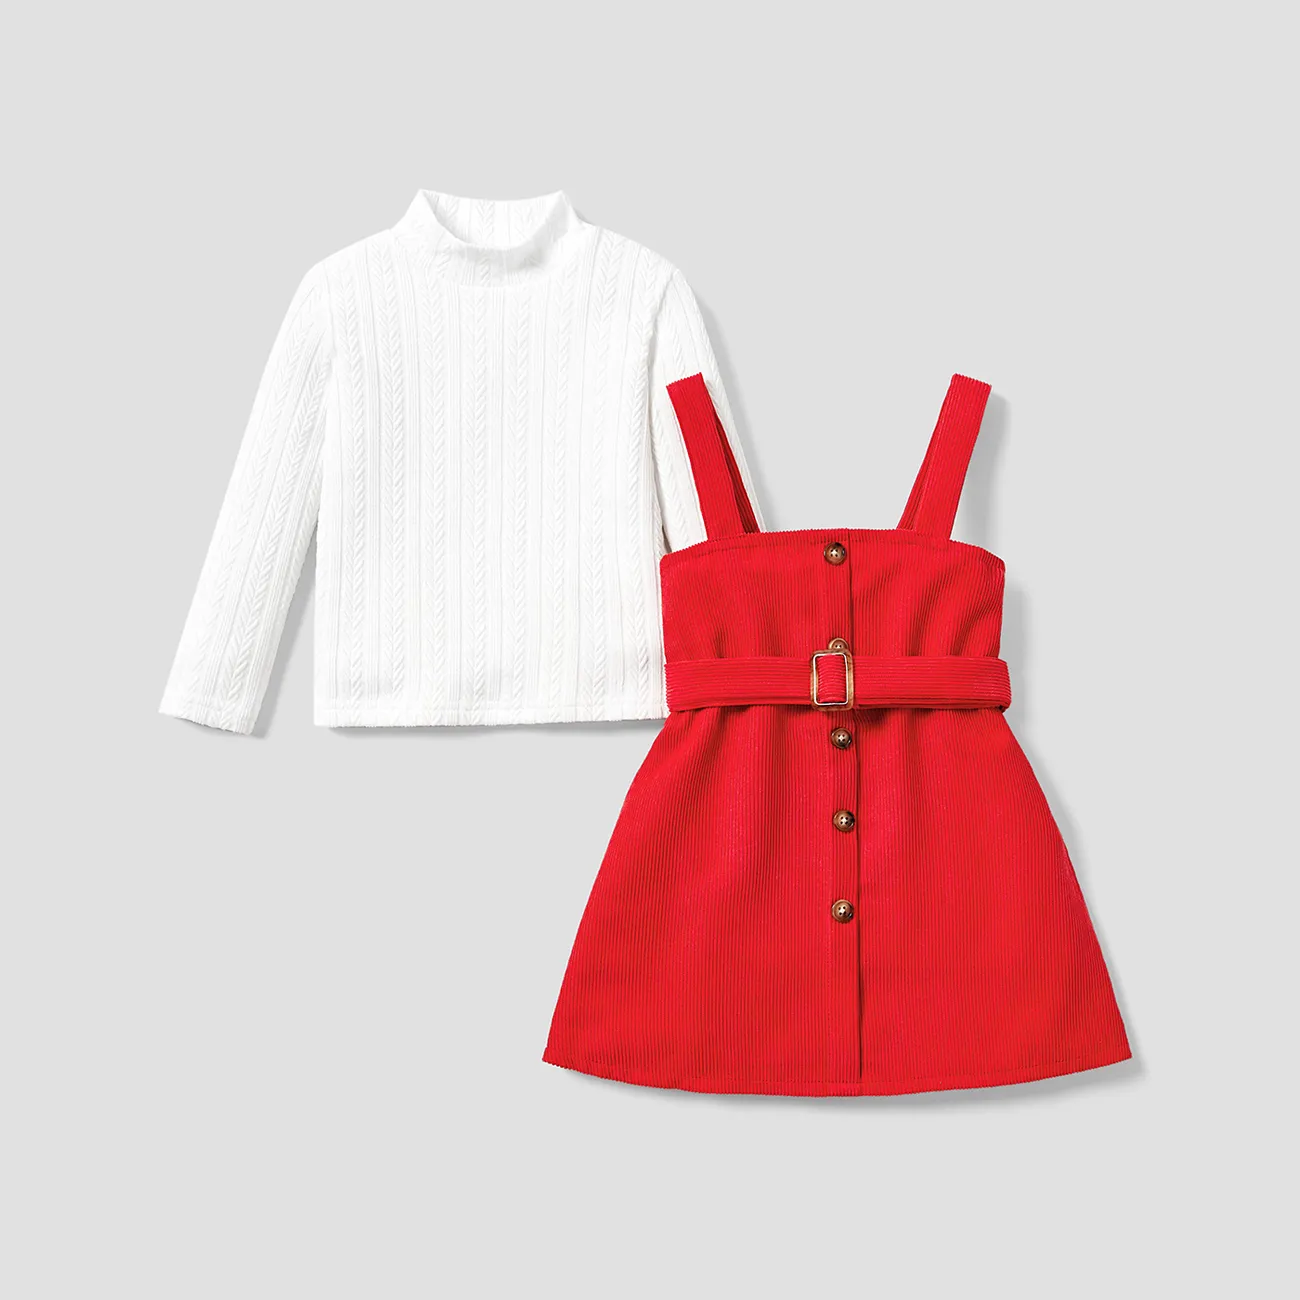 2pcs Toddler Girl Mock Neck Textured White Tee and Button Design Belted Red Overall Dress Set REDWHITE big image 1